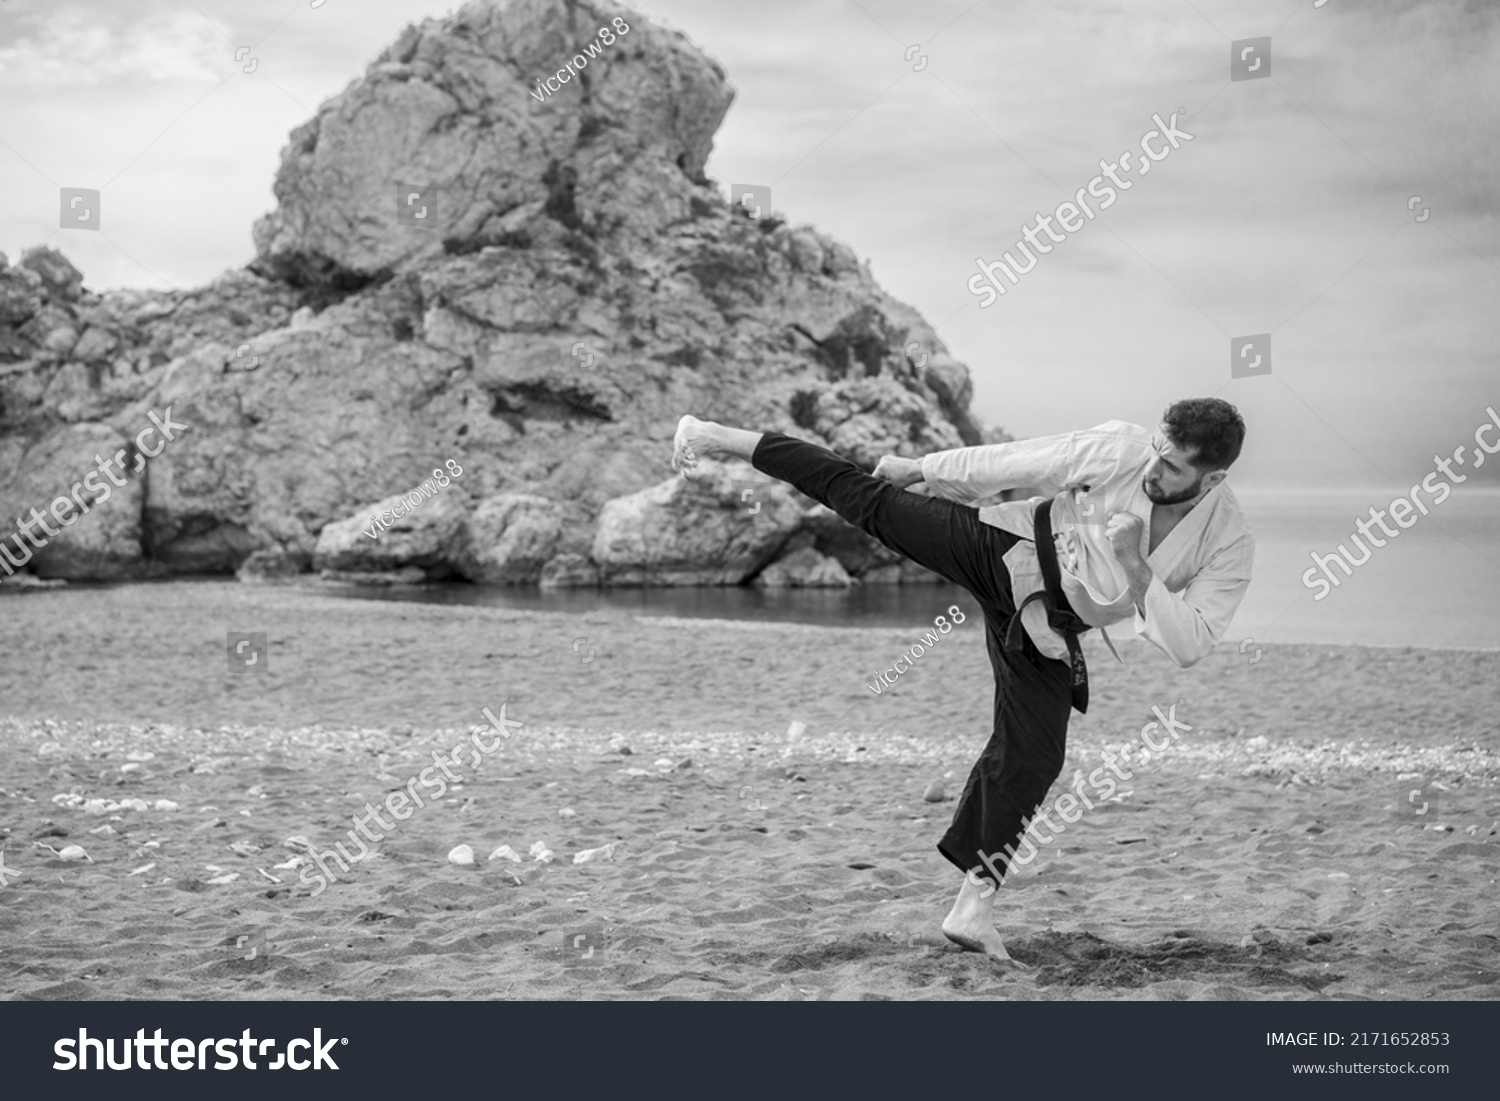 black and white image of a kung fu master in kimono wearing a black belt with the word "Bushido" written in Japanese performing a side kick on the sandy beach with a large rock in the background. #2171652853